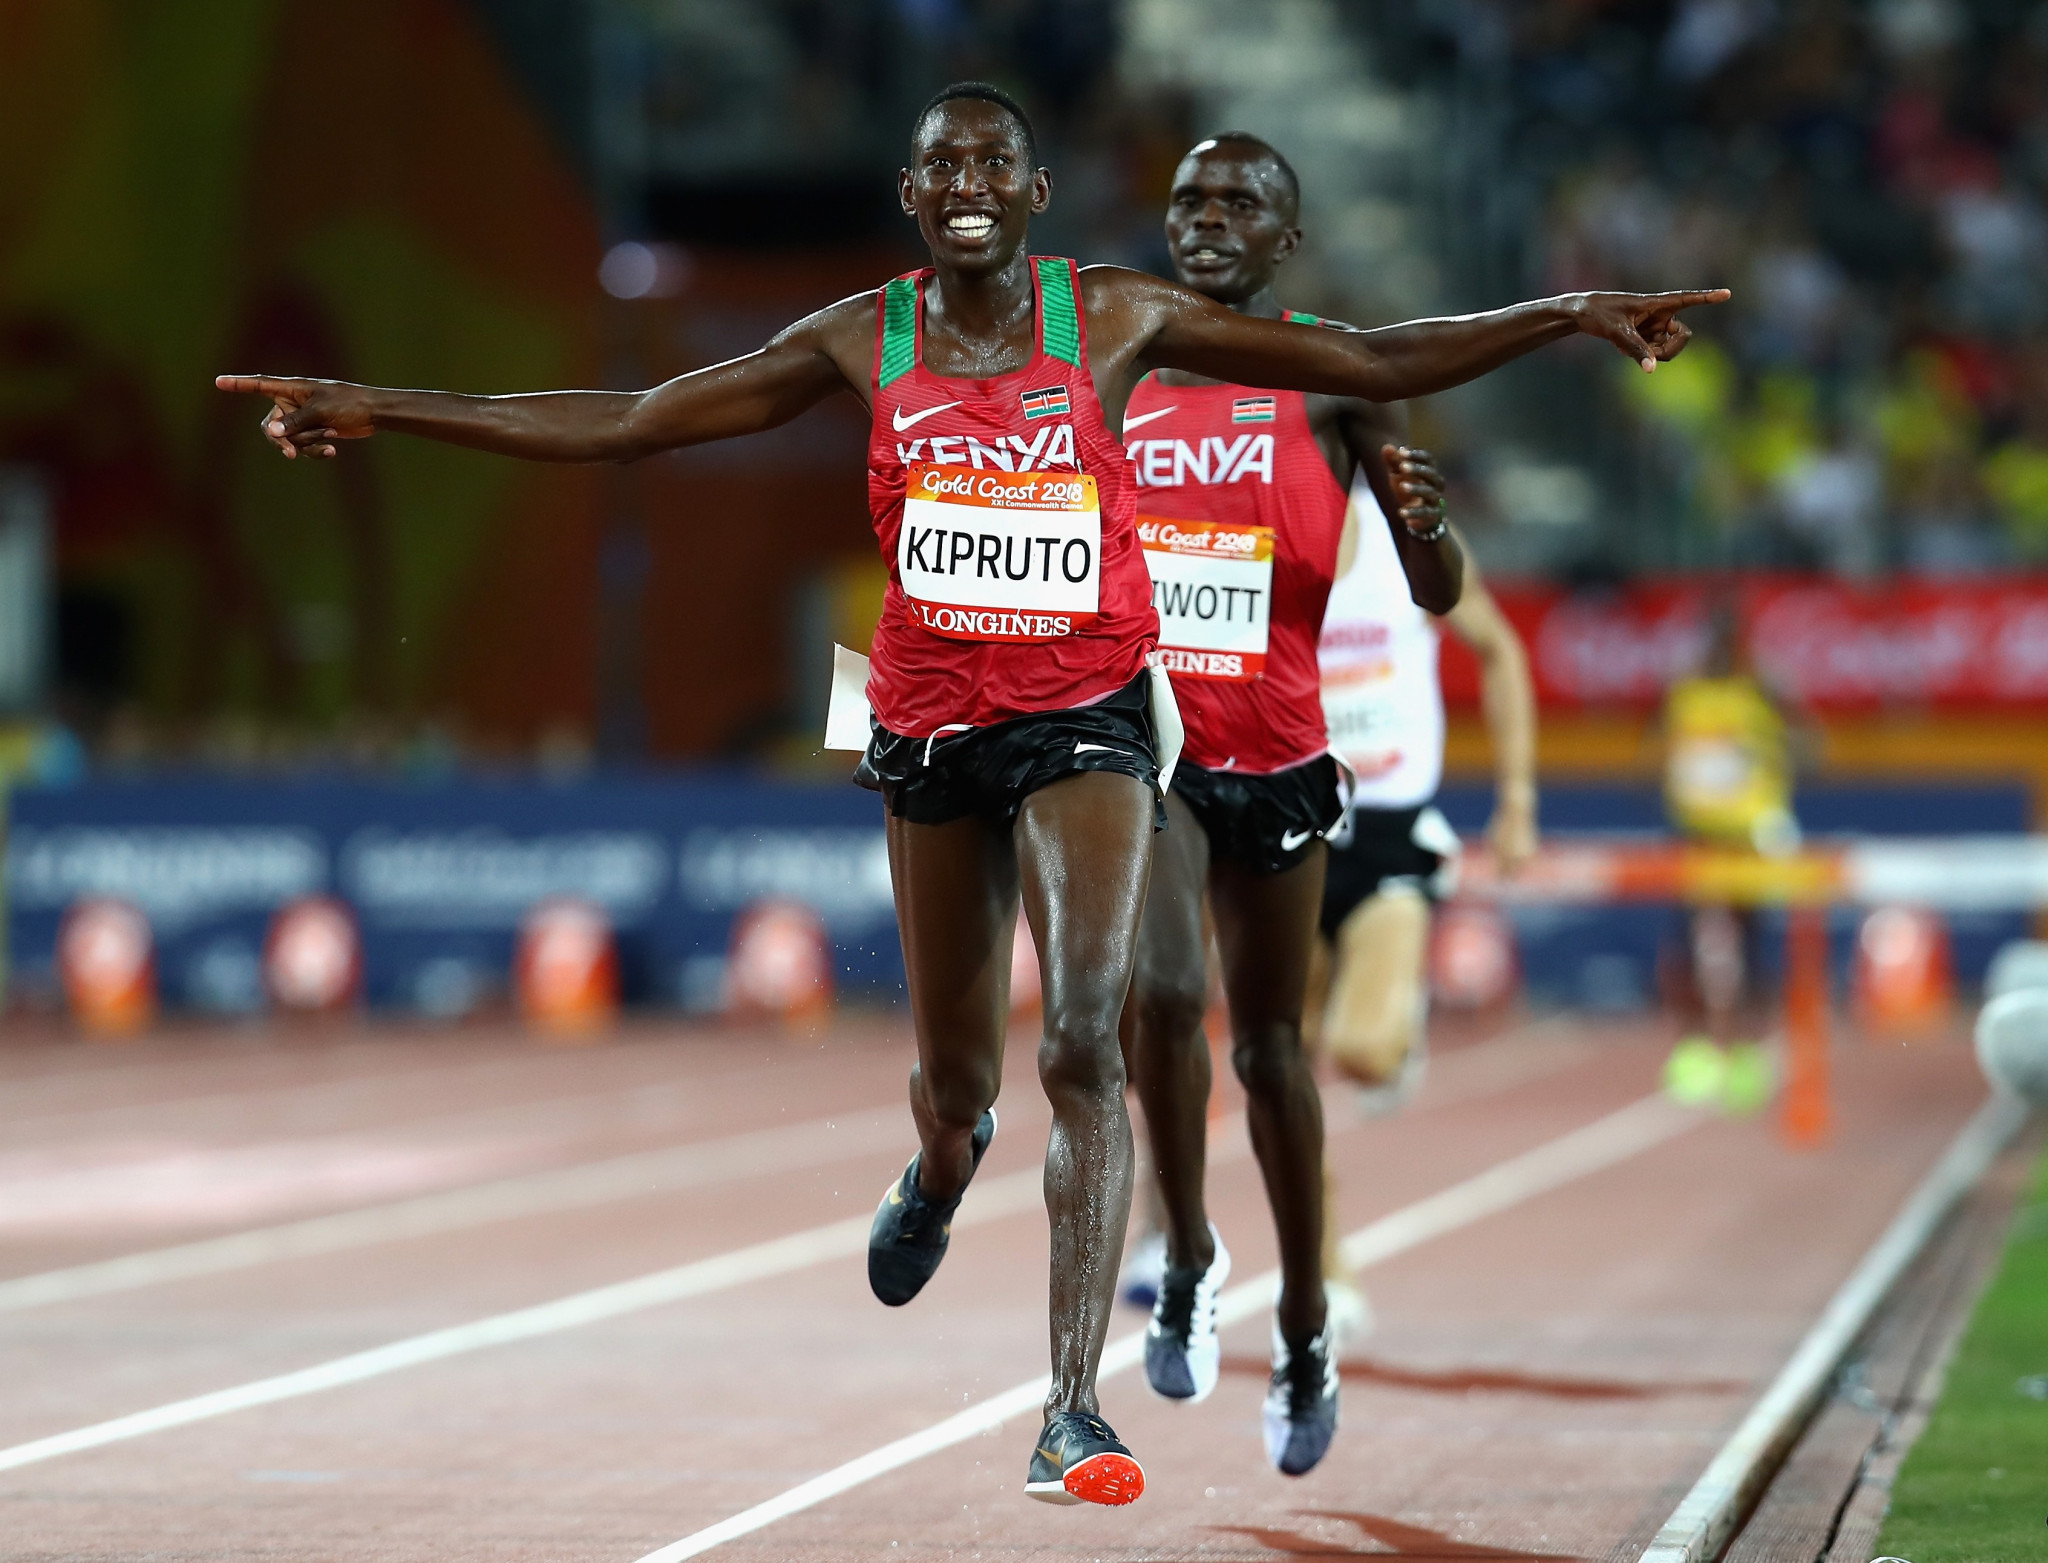 Why Are Kenyans Good At Long Distance Running